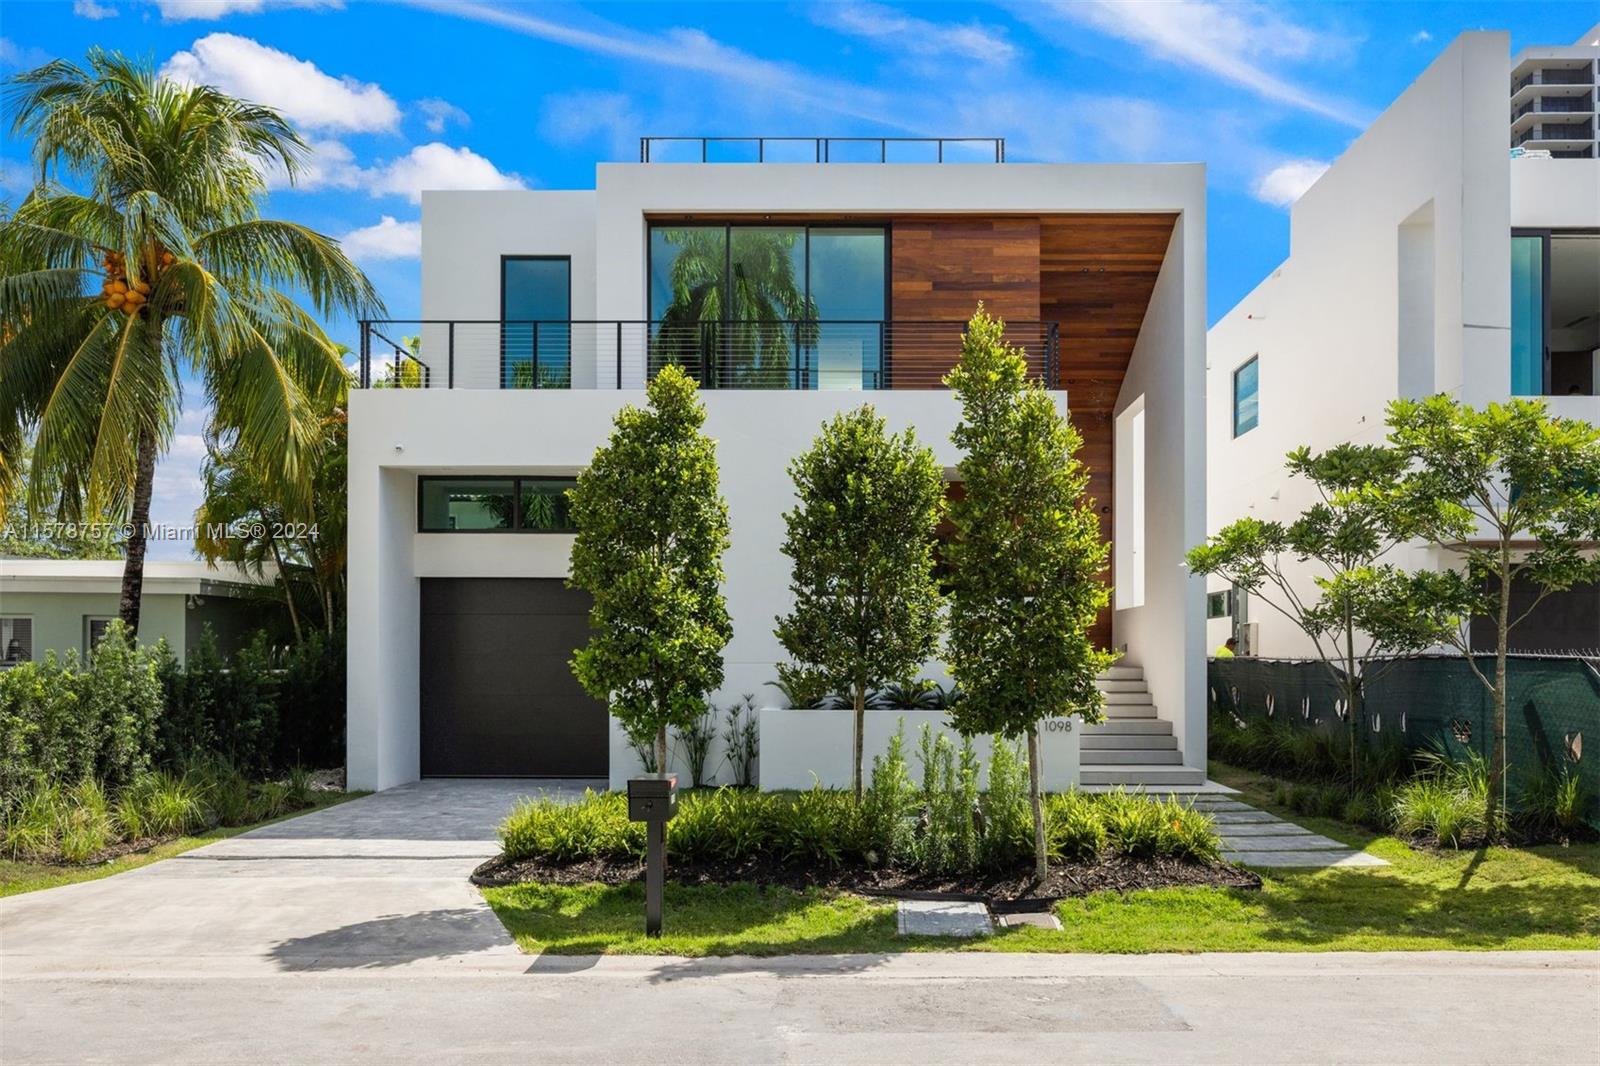 New Construction - Just Completed and Staged in a highly sought-after area, Venetian Islands. This home has over 6,400 Total SF with 5BR/5.5BA designed by Jose Sanchez - Praxis Architecture. The open floor plan connects the living area, family room, and Italian chef’s kitchen with exterior summer kitchen designed perfectly for entertainment. This home as well features top of the line Gaggenau appliances, smart home technology, swimming pool, master suite with large walk-in closet and terrace, climate controlled wine cellar with racks, rooftop terrace with 360 degree views + summer kitchen, and many more. Amazing opportunity to live on a dead-end street in the Venetian Islands. This home is in walking distance to Sunset Harbor, Lincoln Road, Miami Beach Golf Course, Beach, and much more.